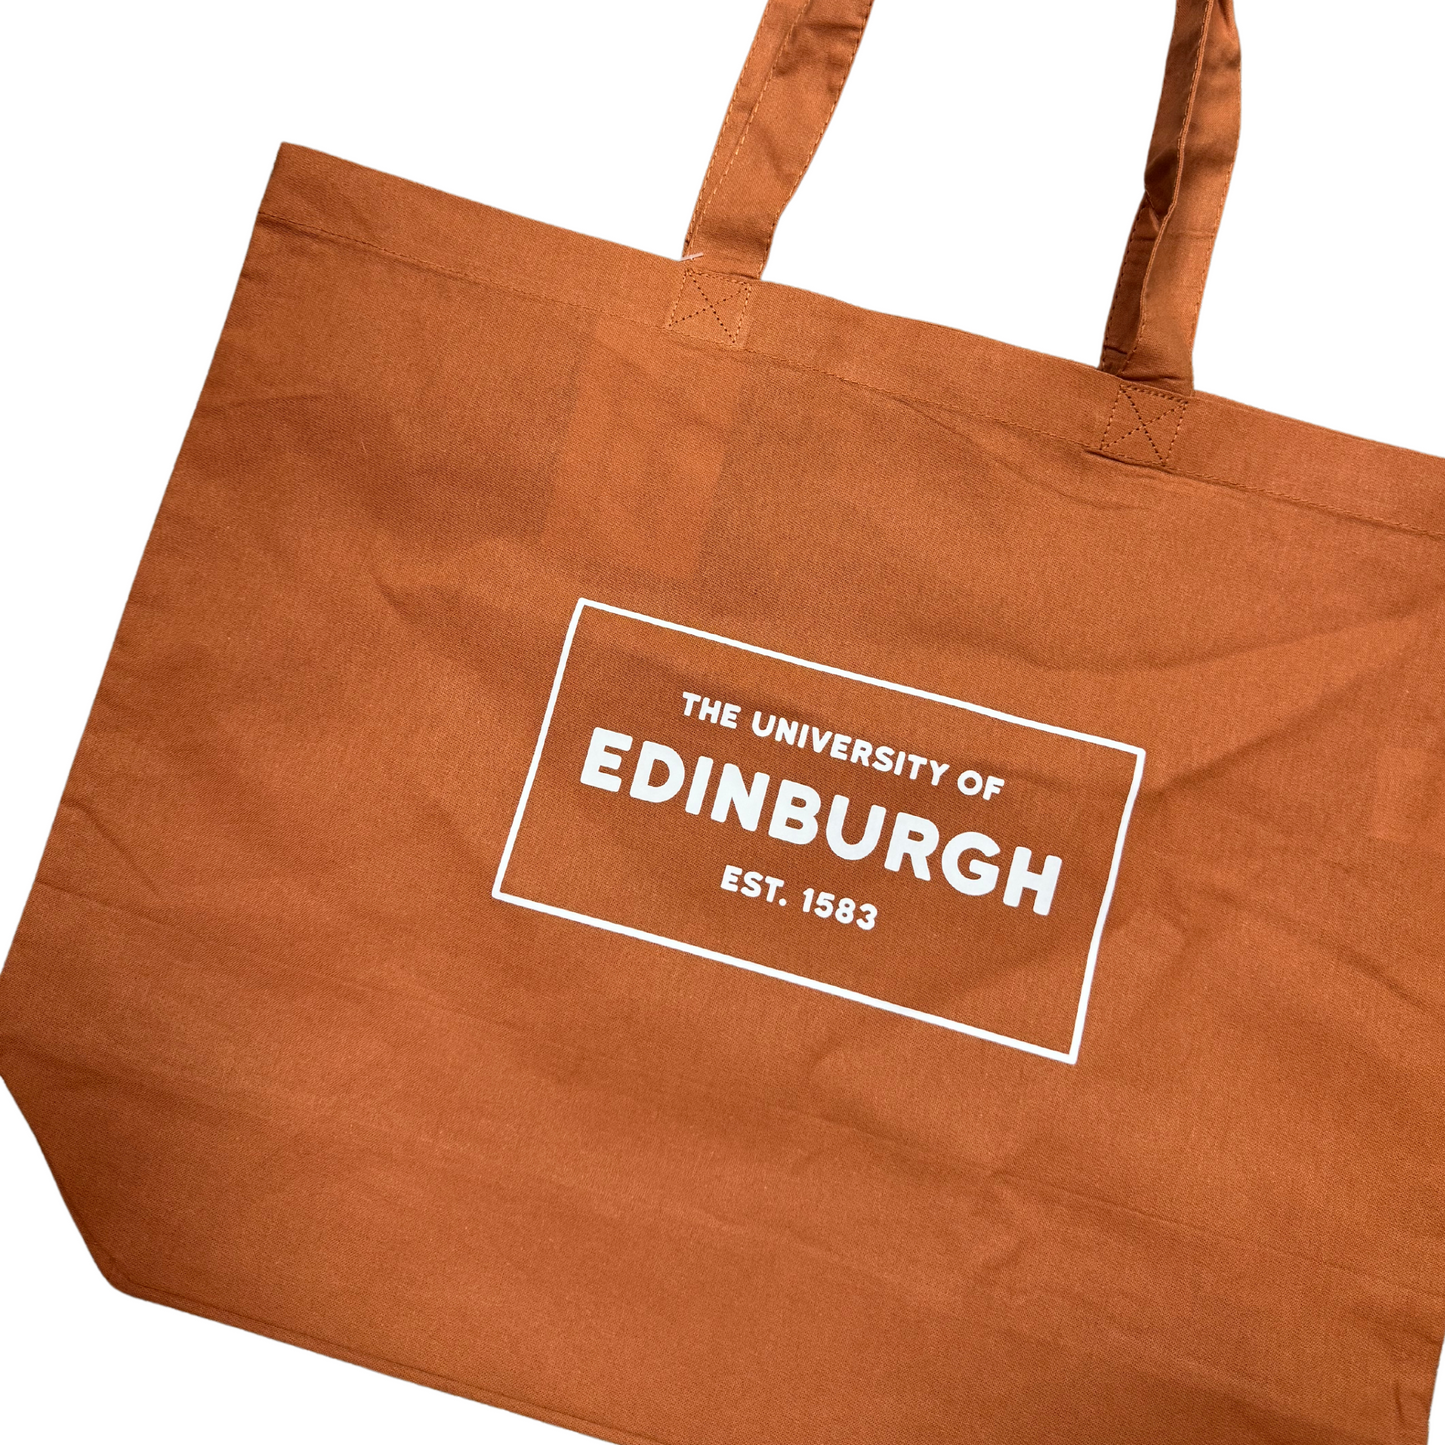 close-up of an orange tote bag with a white box that says The University of Edinburgh est. 1583